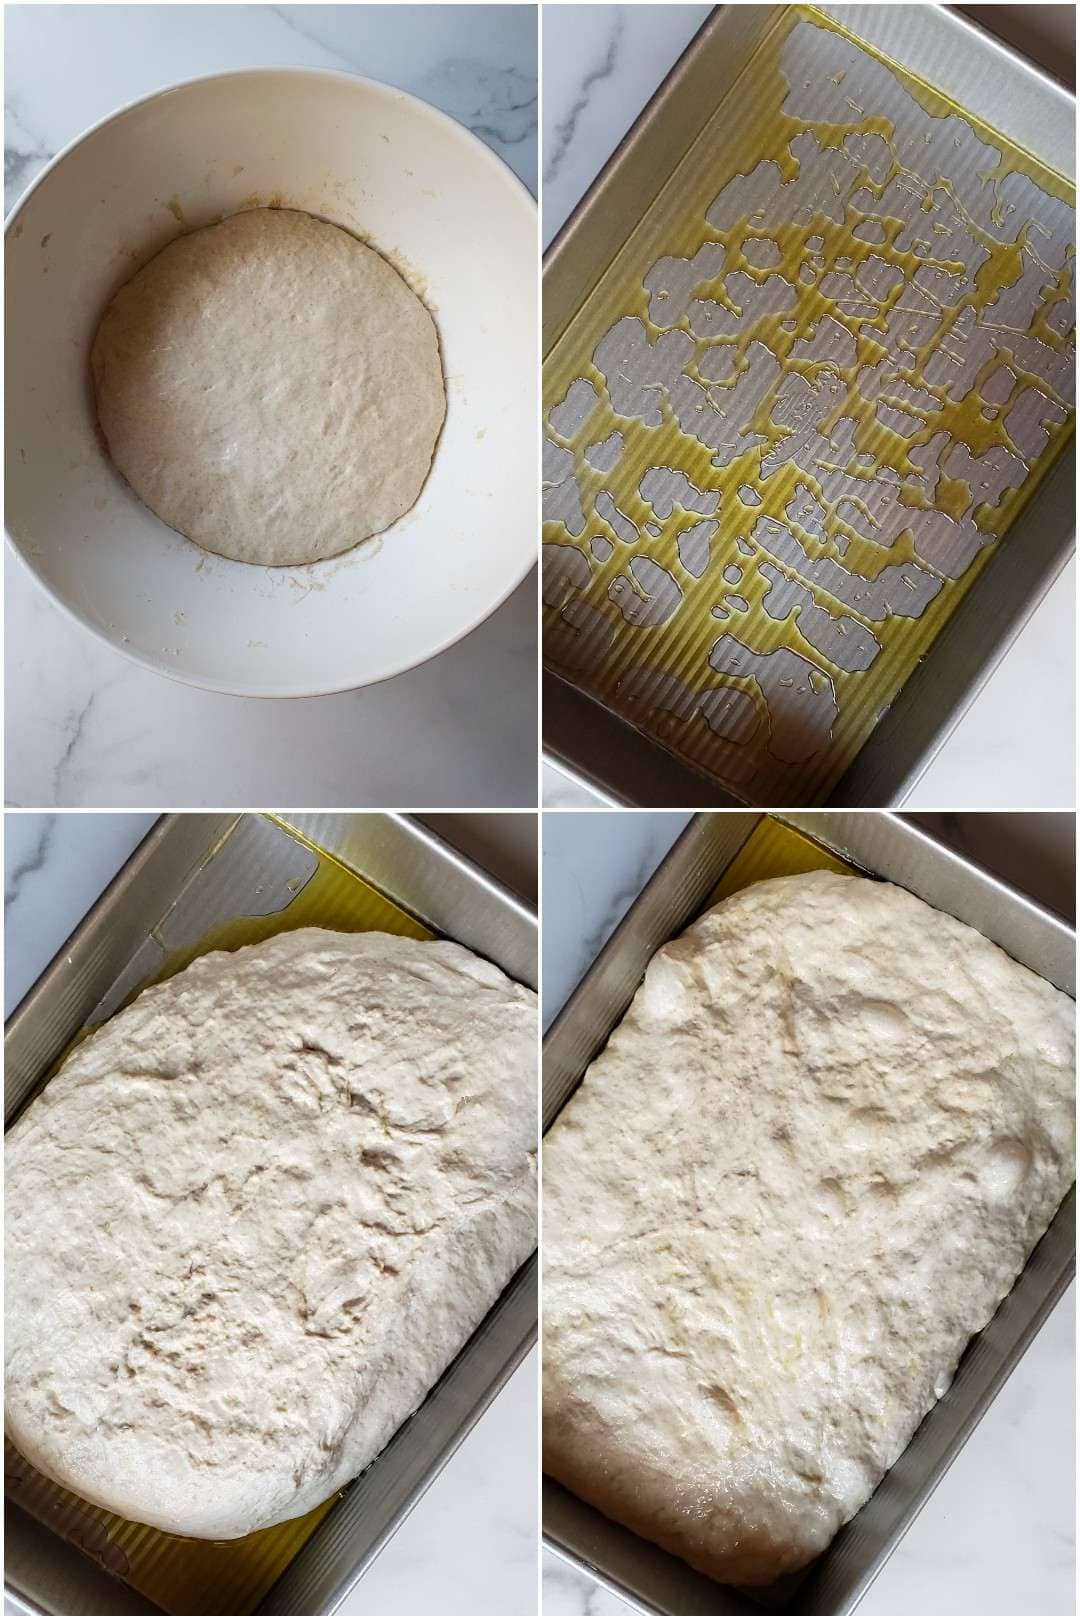 A four part image collage, the first image shows the white mixing bowl with the dough resting inside it. The second image is of a baking pan that has been oiled with extra virgin olive oil. The third image shows the dough once it has been transferred into the oiled pan. The fourth image shows the dough after it has been lightly pushed and pulled to fill out the dimensions of the pan.